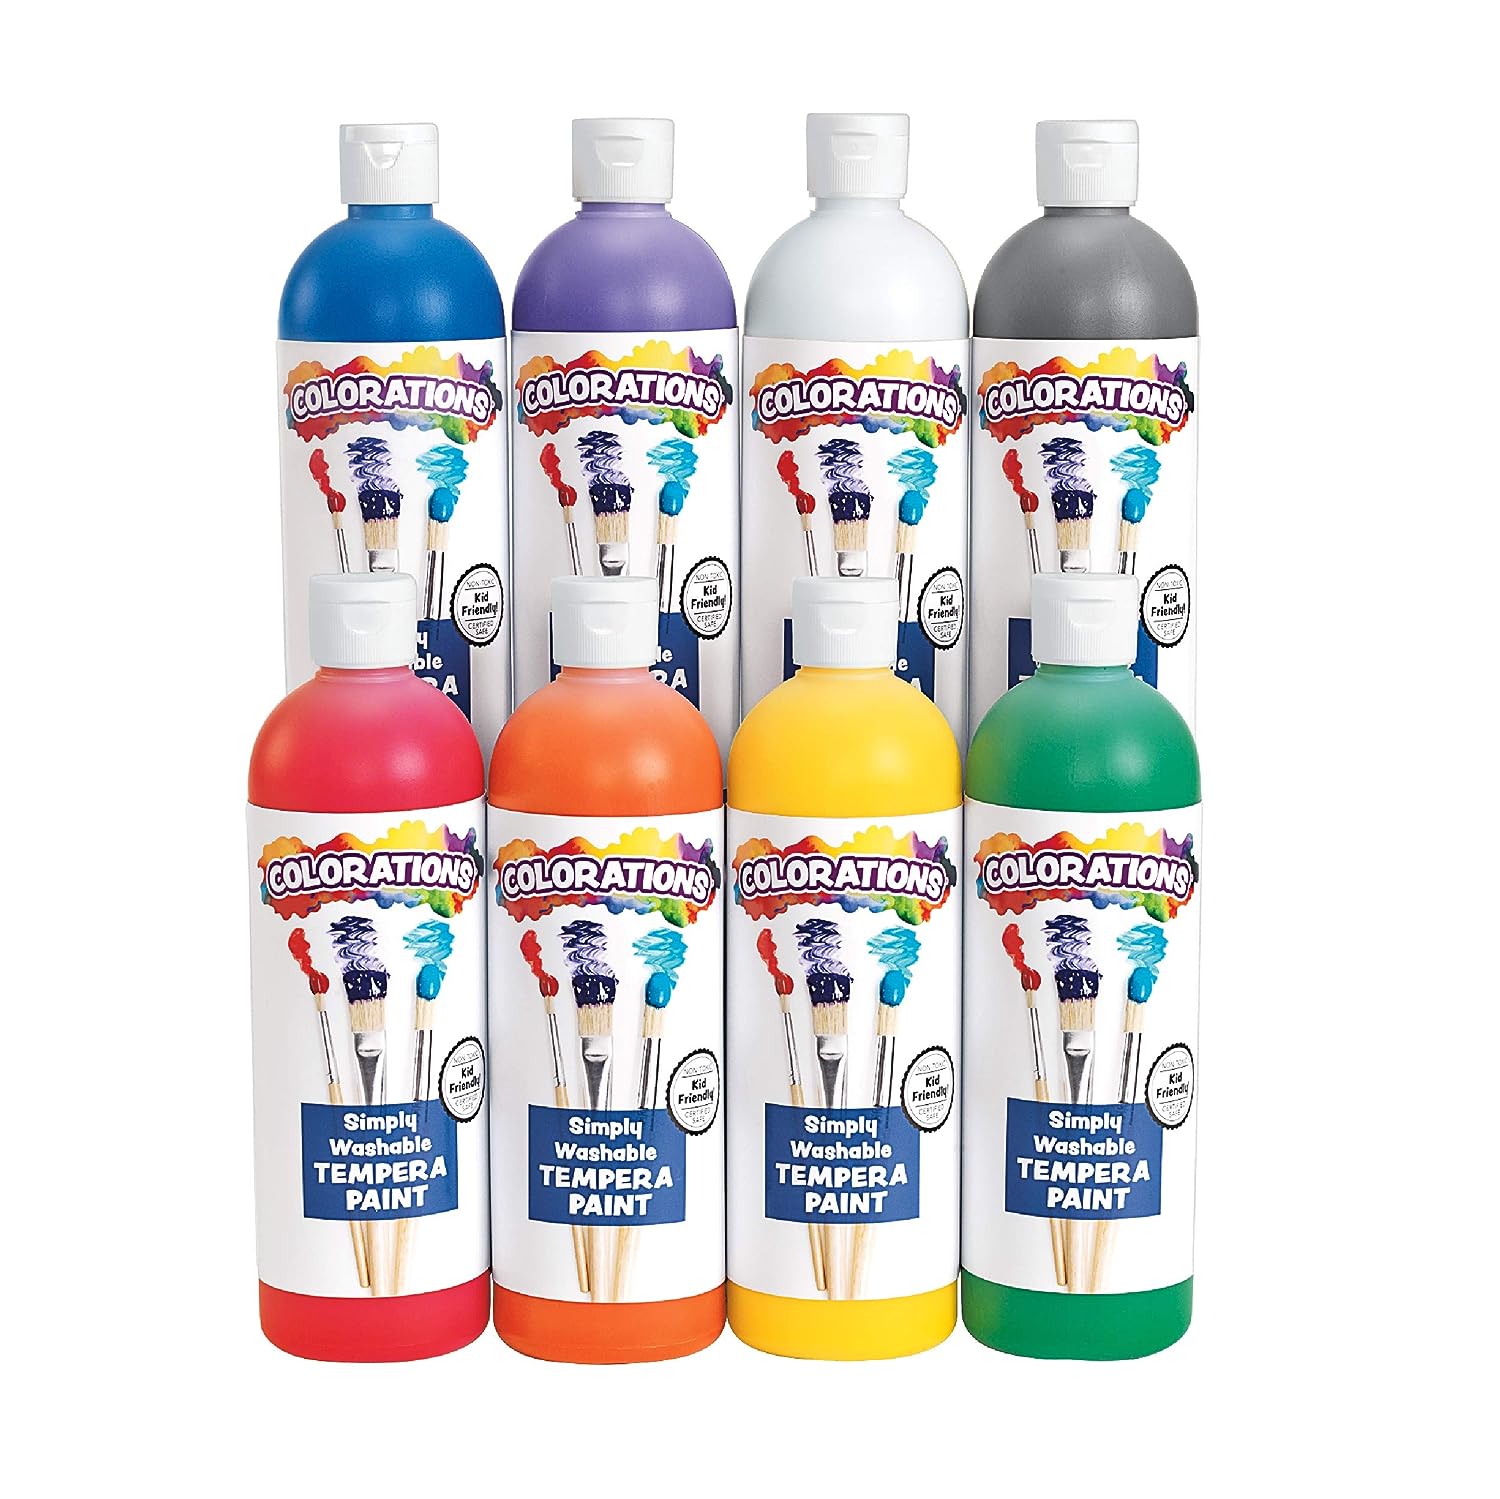 Colorations Simply Washable Tempera Paint, Rainbow [...]